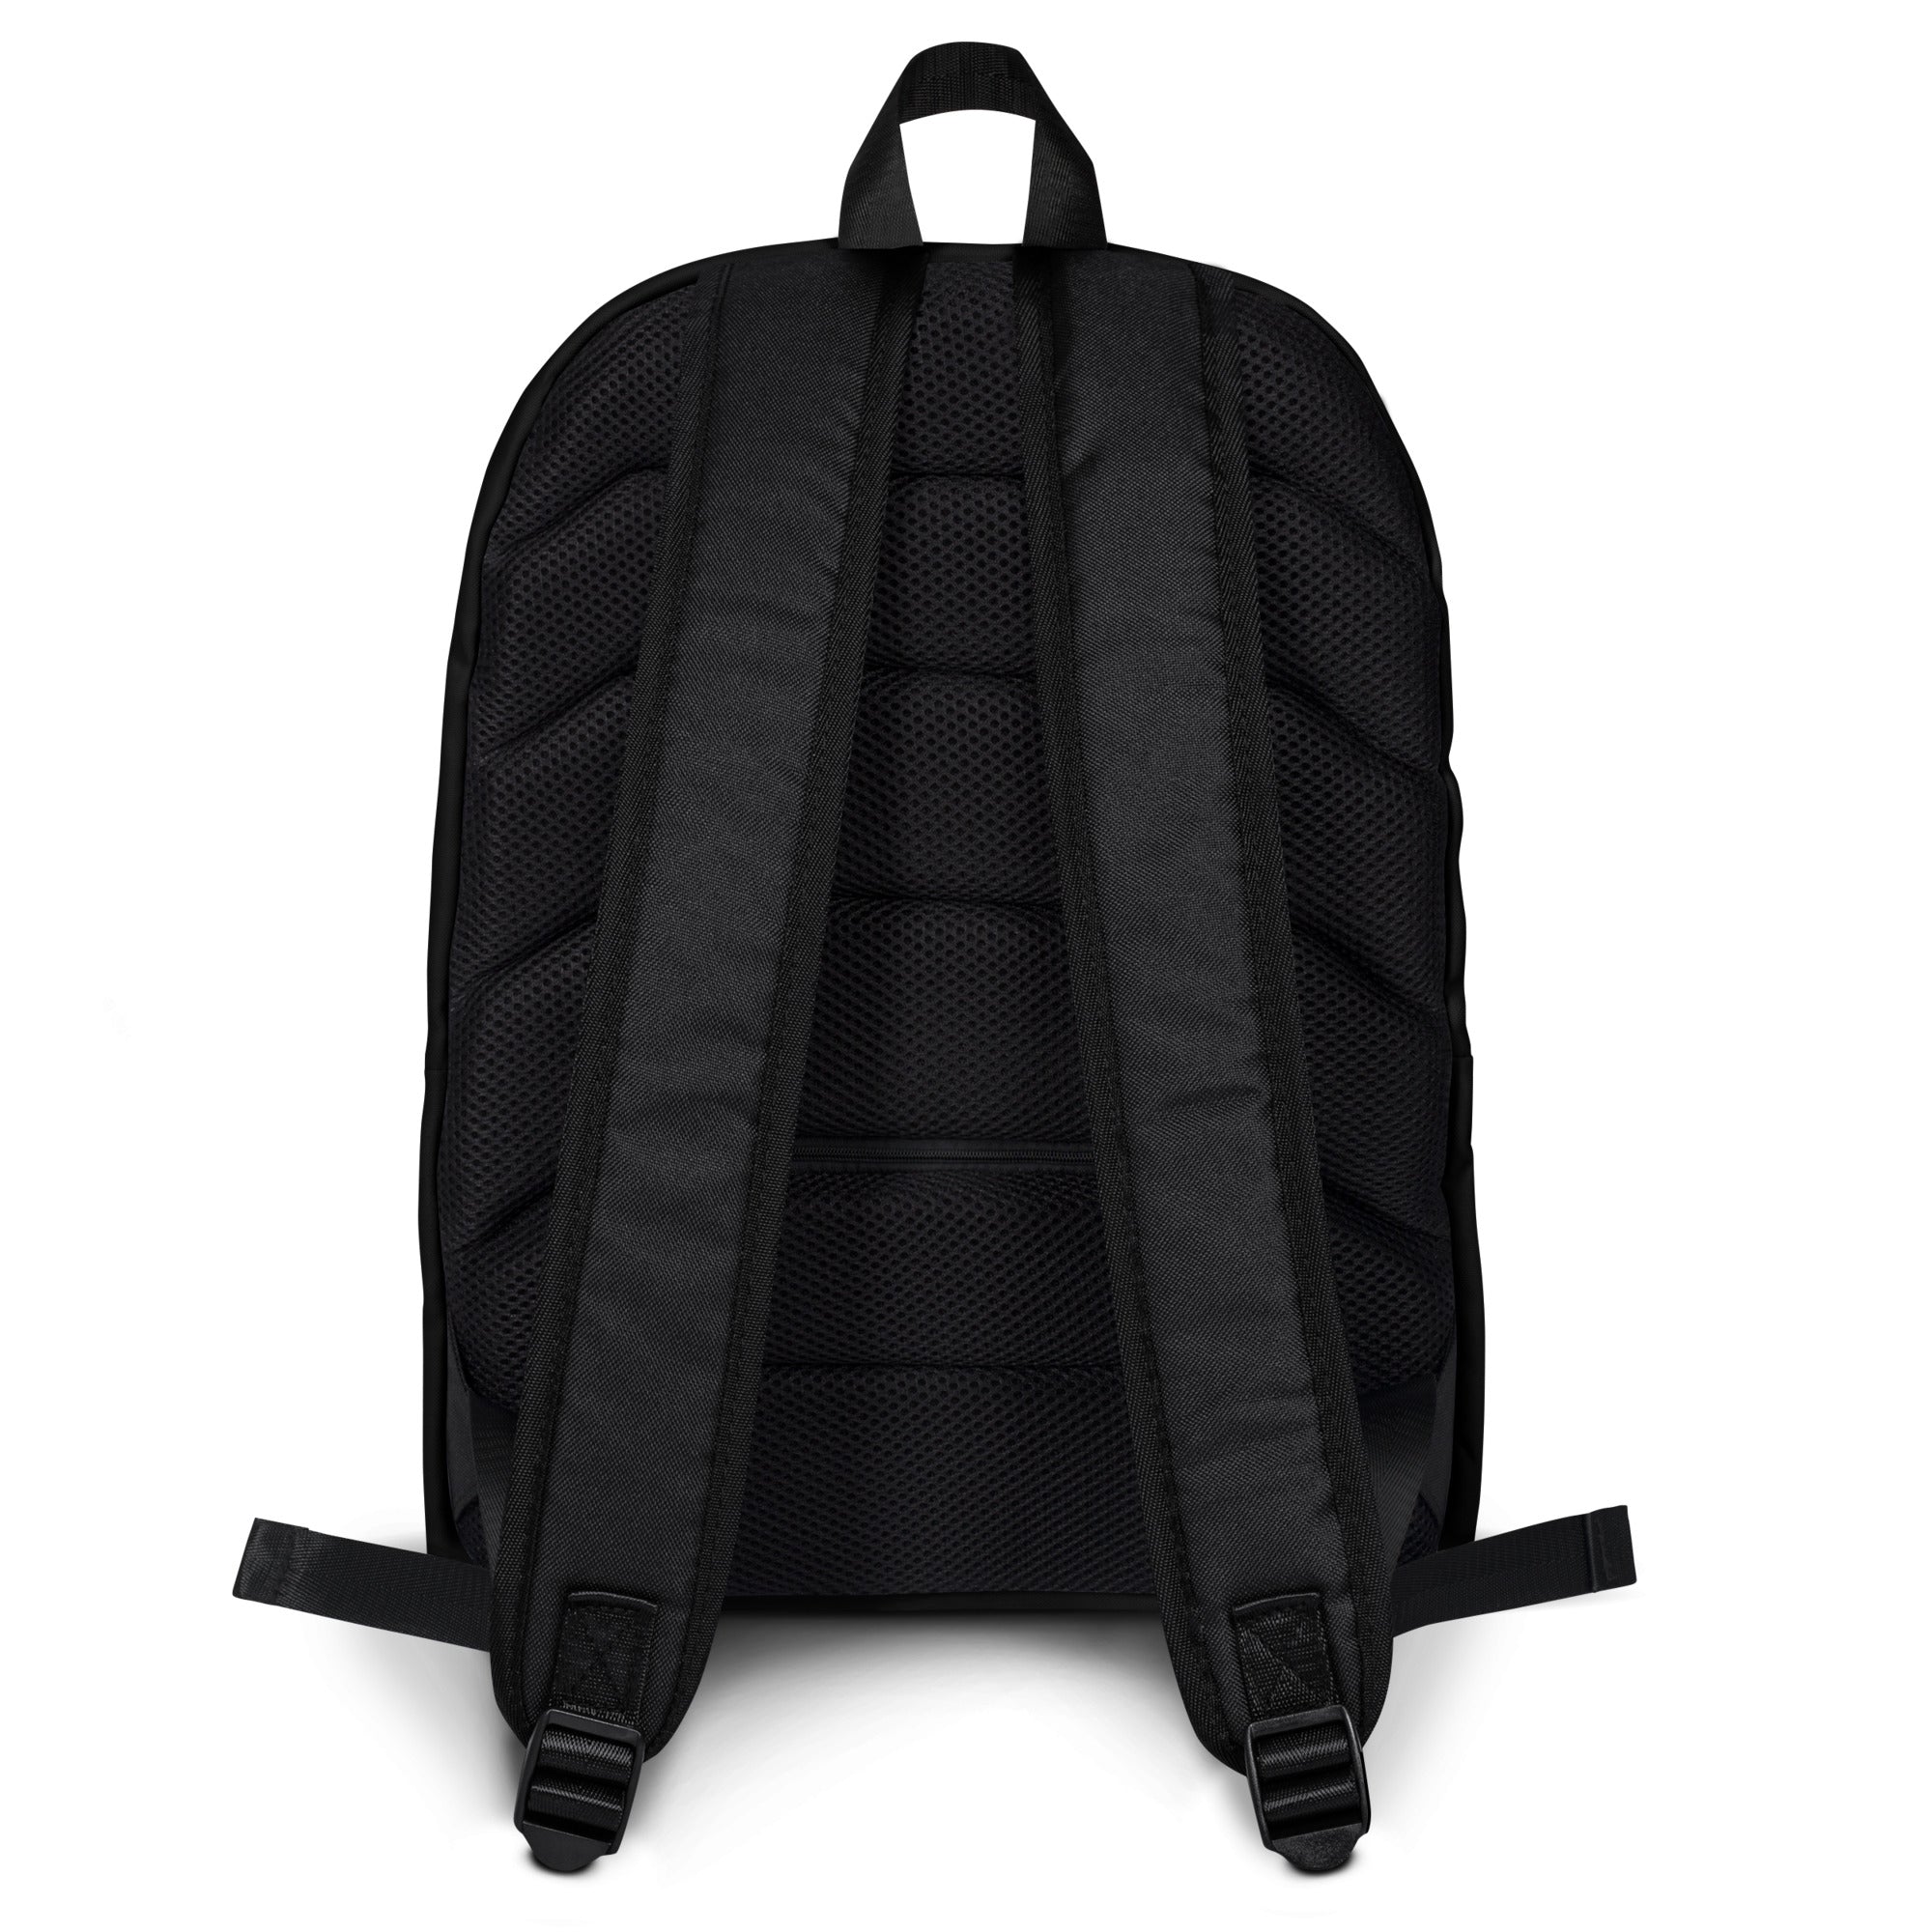 Bars and Palms, Envy Backpack